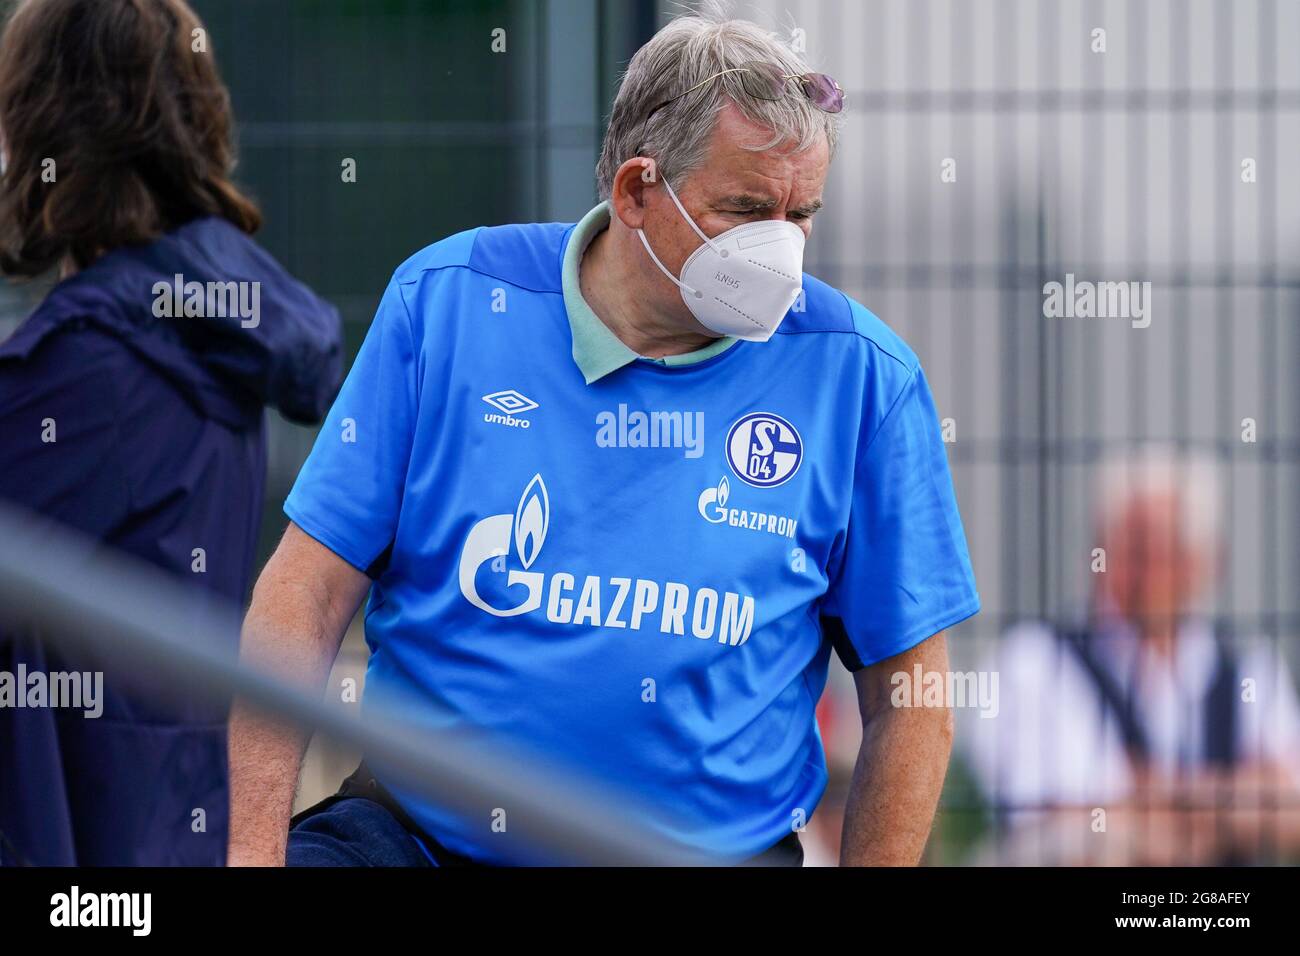 GELSENKIRCHEN, GERMANY - JULY 16: Supporter of Schalke 04 during the Club Friendly match between FC Schalke 04 and Vitesse at Parkstadion on July 16, 2021 in Gelsenkirchen, Germany (Photo by Joris Verwijst/Orange Pictures) Stock Photo